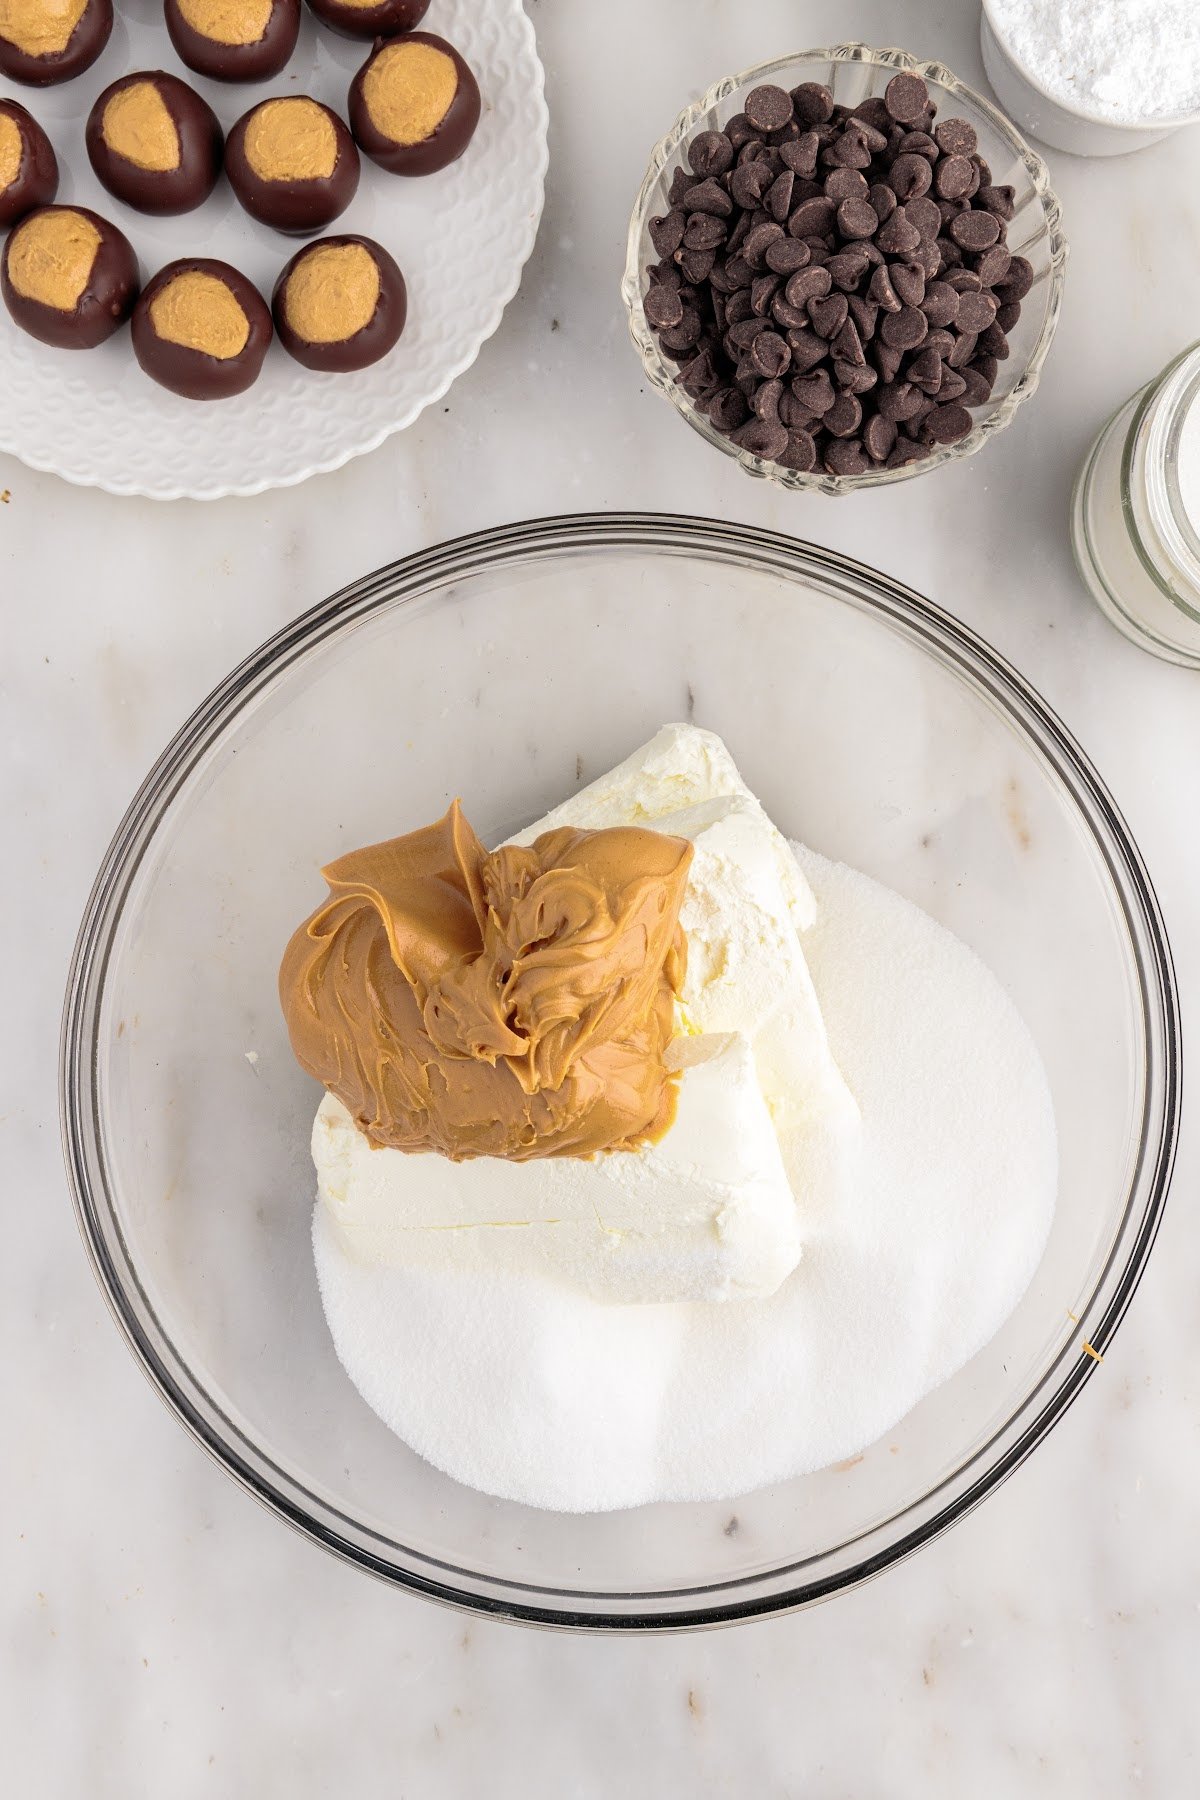 Sugar, cream cheese and peanut butter in a mixing bowl.